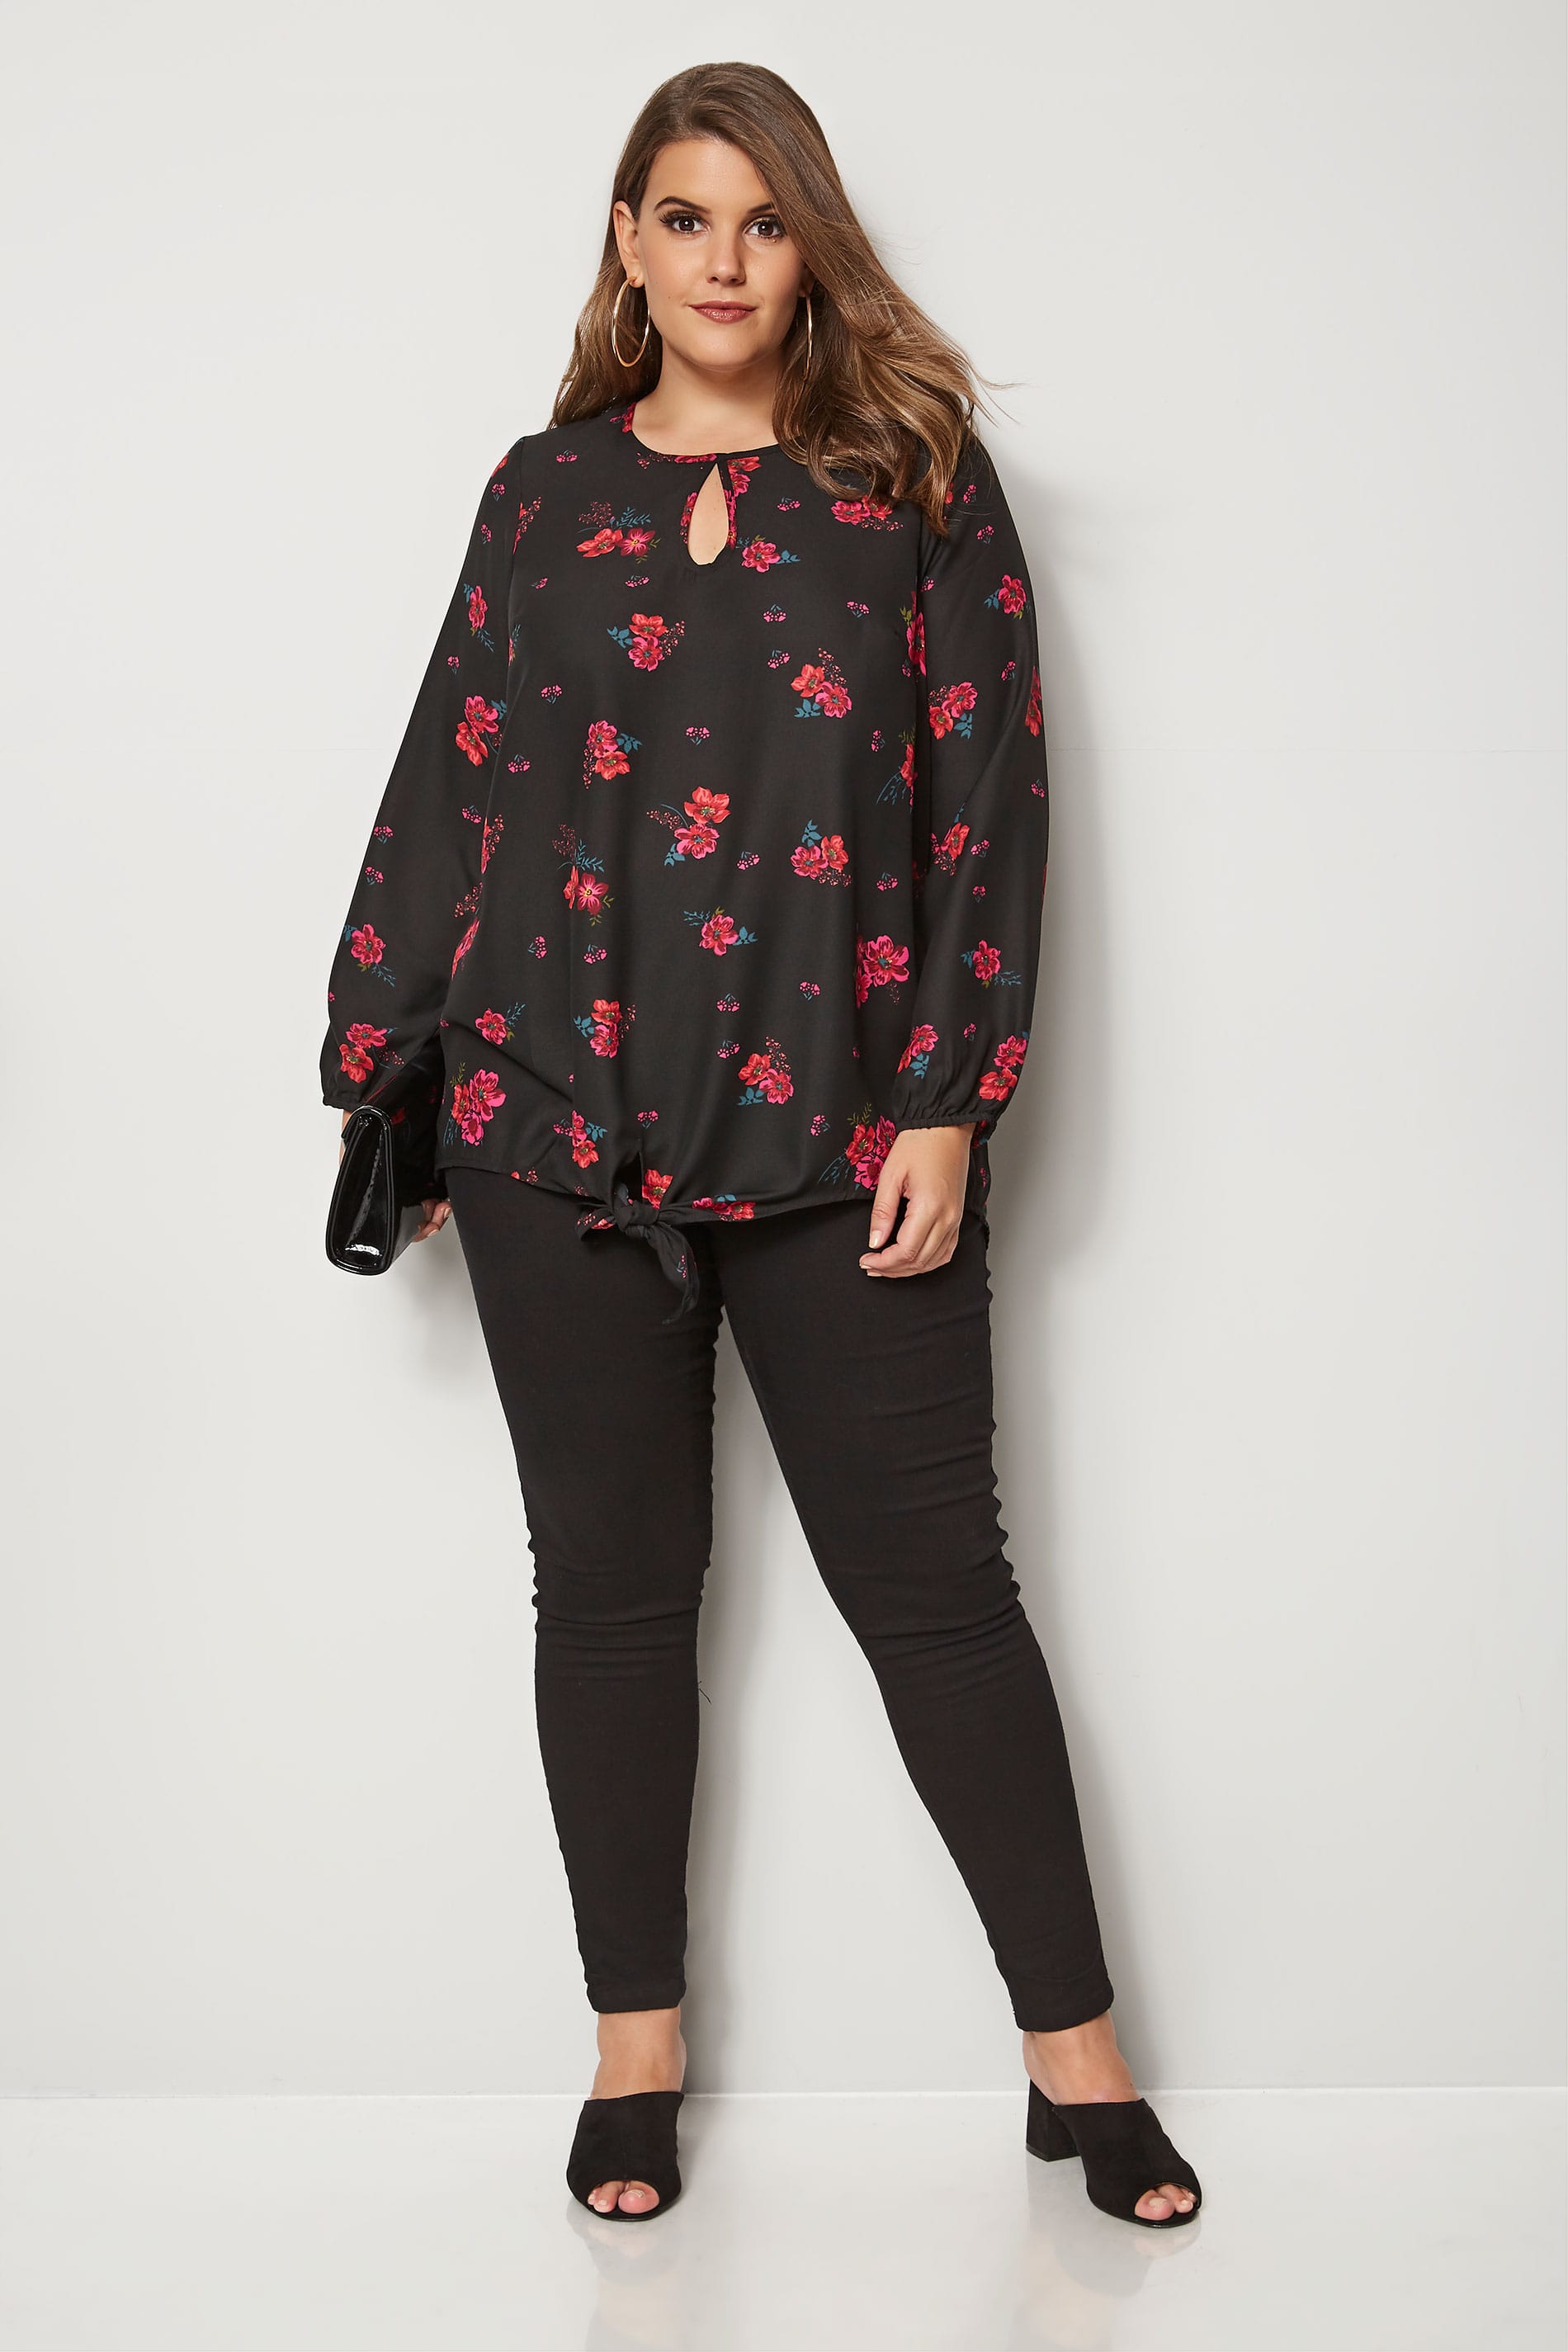 Black Floral Blouse With Tie-Front, plus size 16 to 36